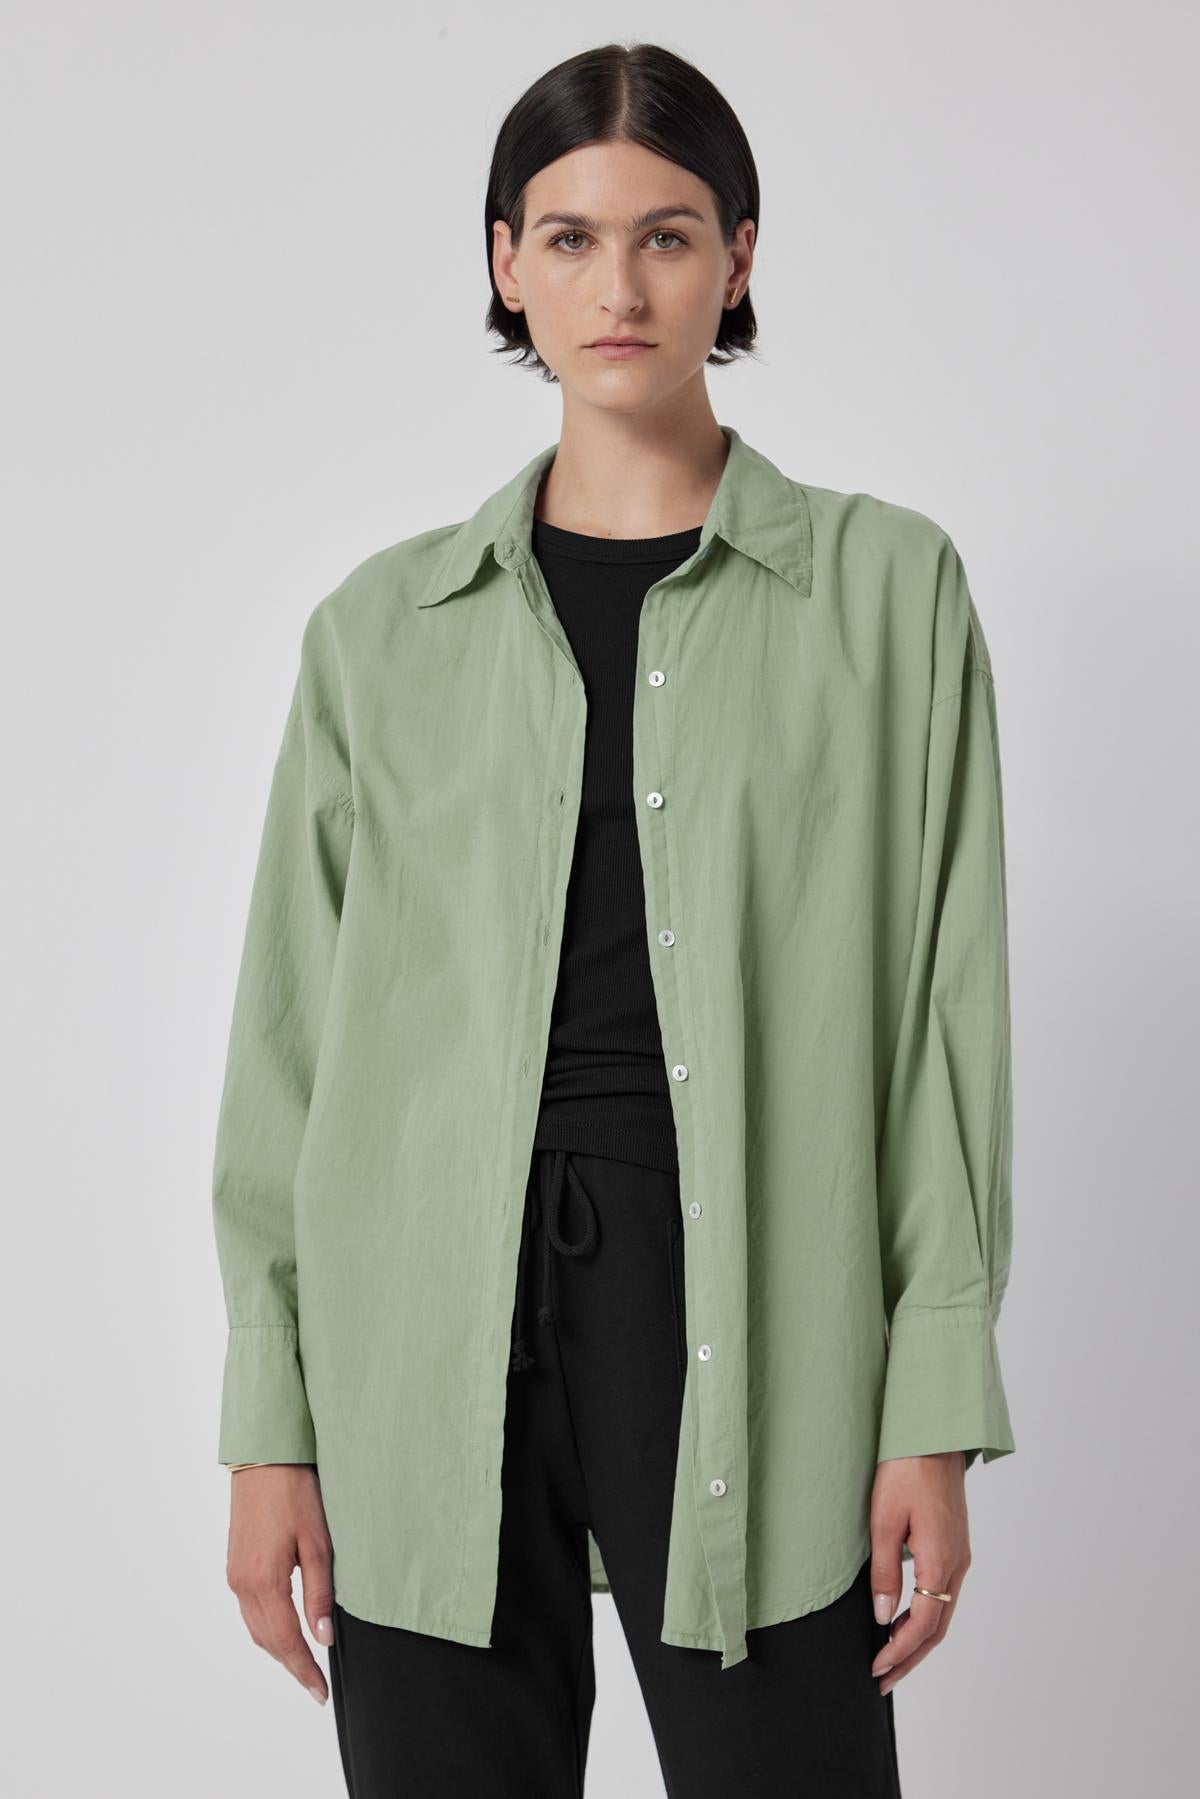 A woman wearing an oversized green REDONDO BUTTON-UP SHIRT by Velvet by Jenny Graham and black pants.-36198179995841